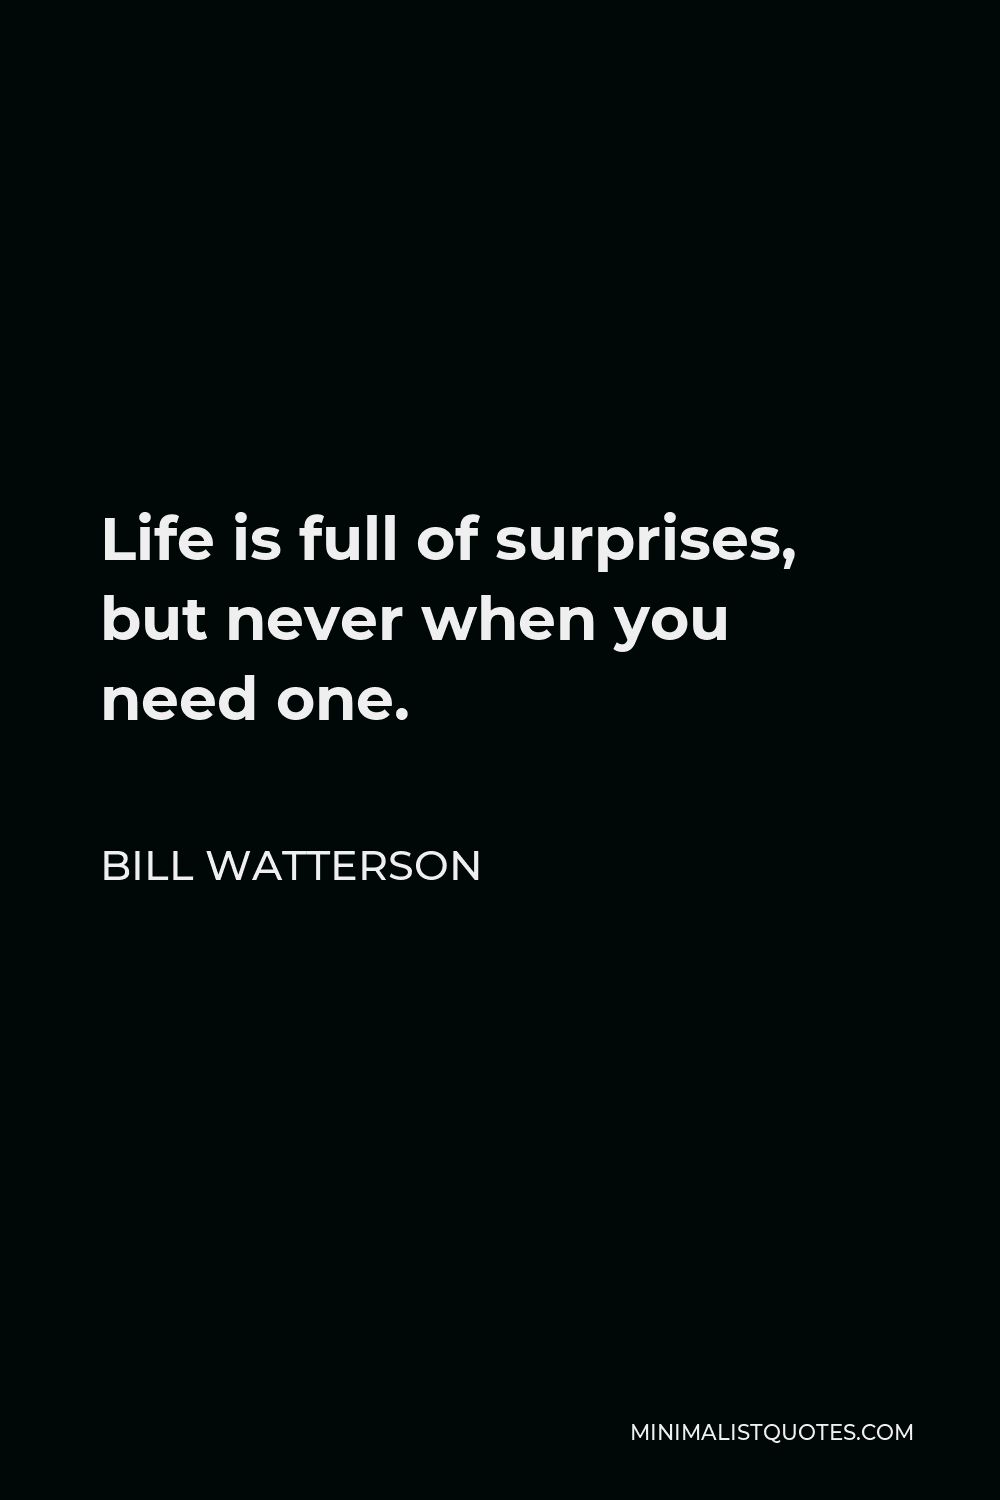 Bill Watterson Quote - Life is full of surprises, but never when you need one.